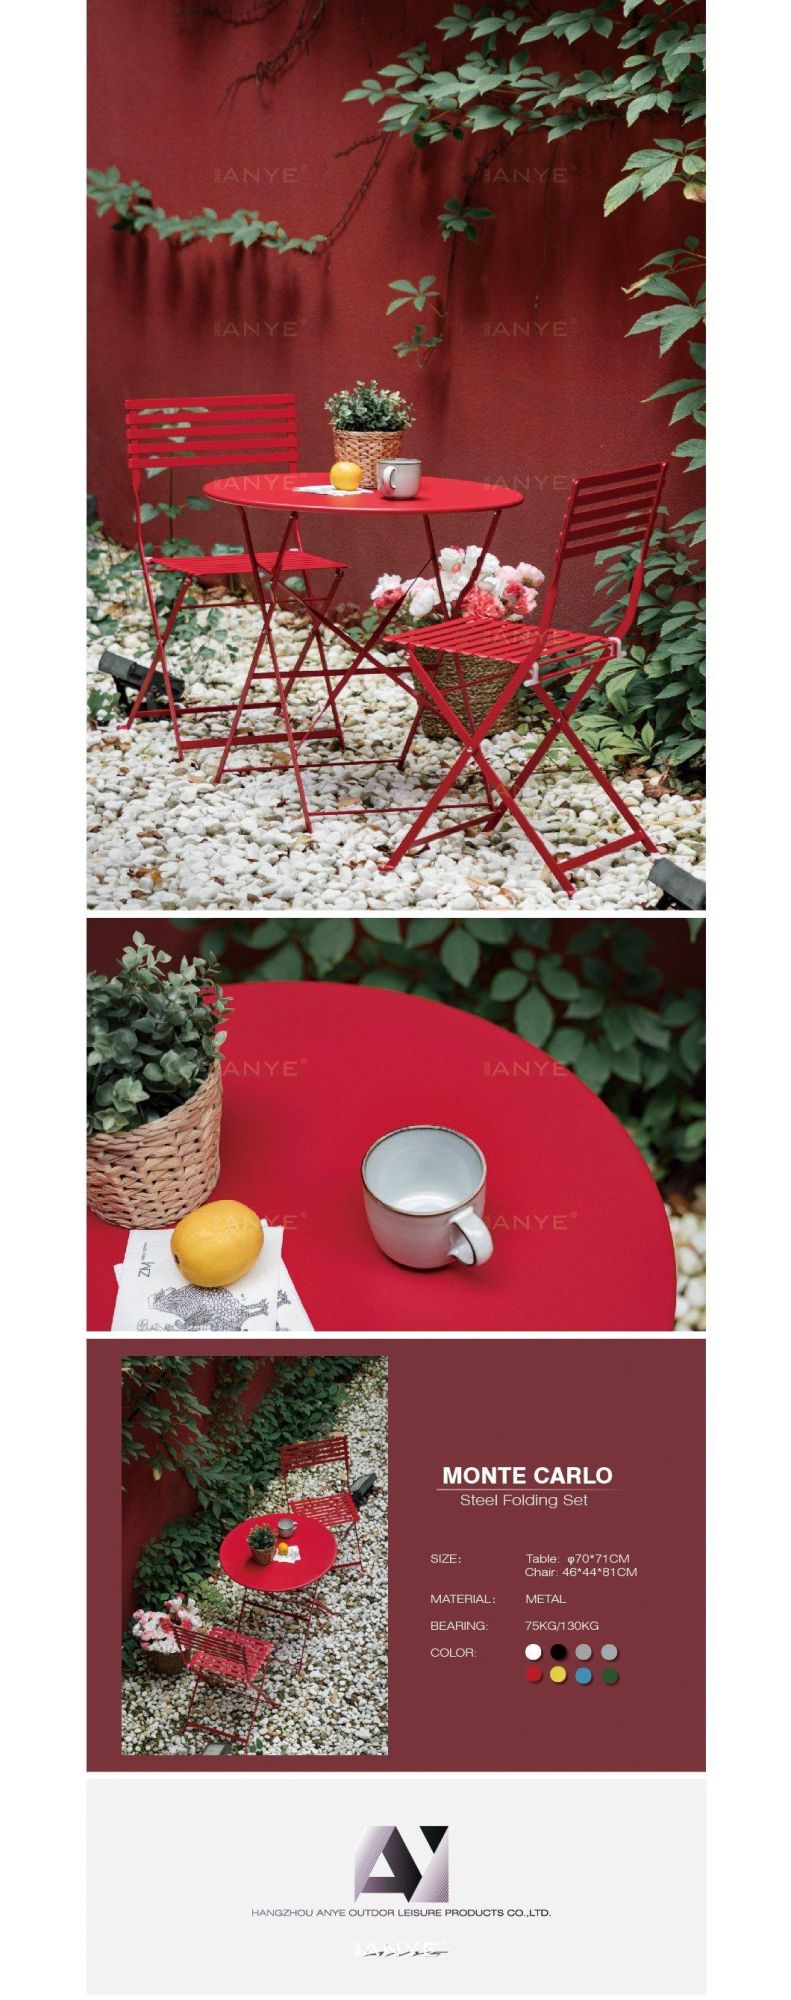 Backyard Furniture Rust Resistant Foldable Dining Table and Chair Modern Wedding Furniture